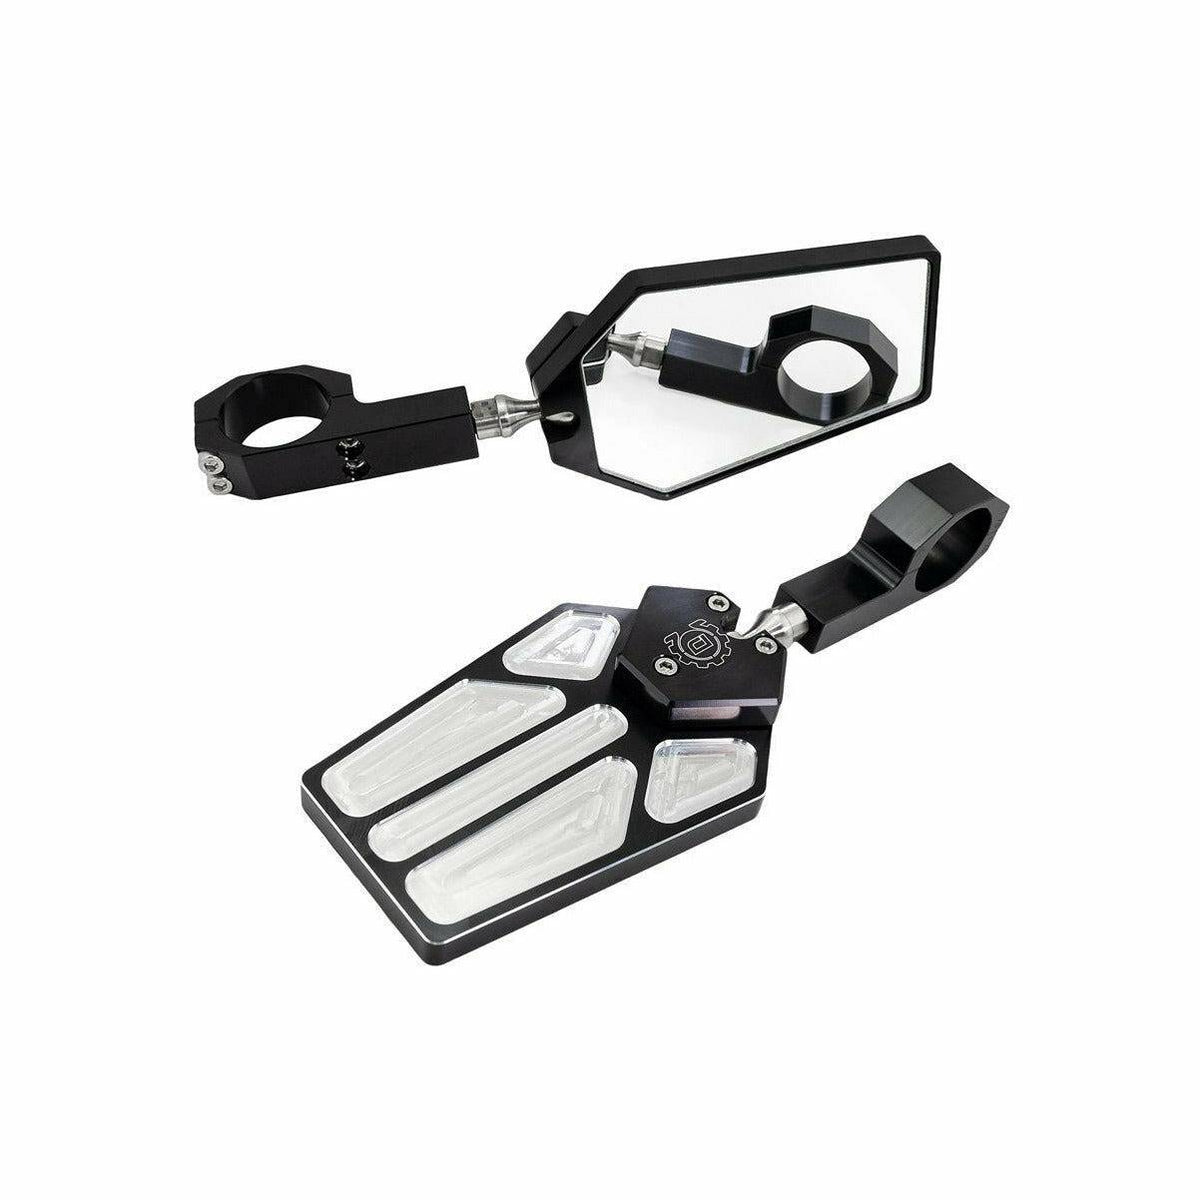 Deviant Billet Side Mirrors 1.85" Clamps